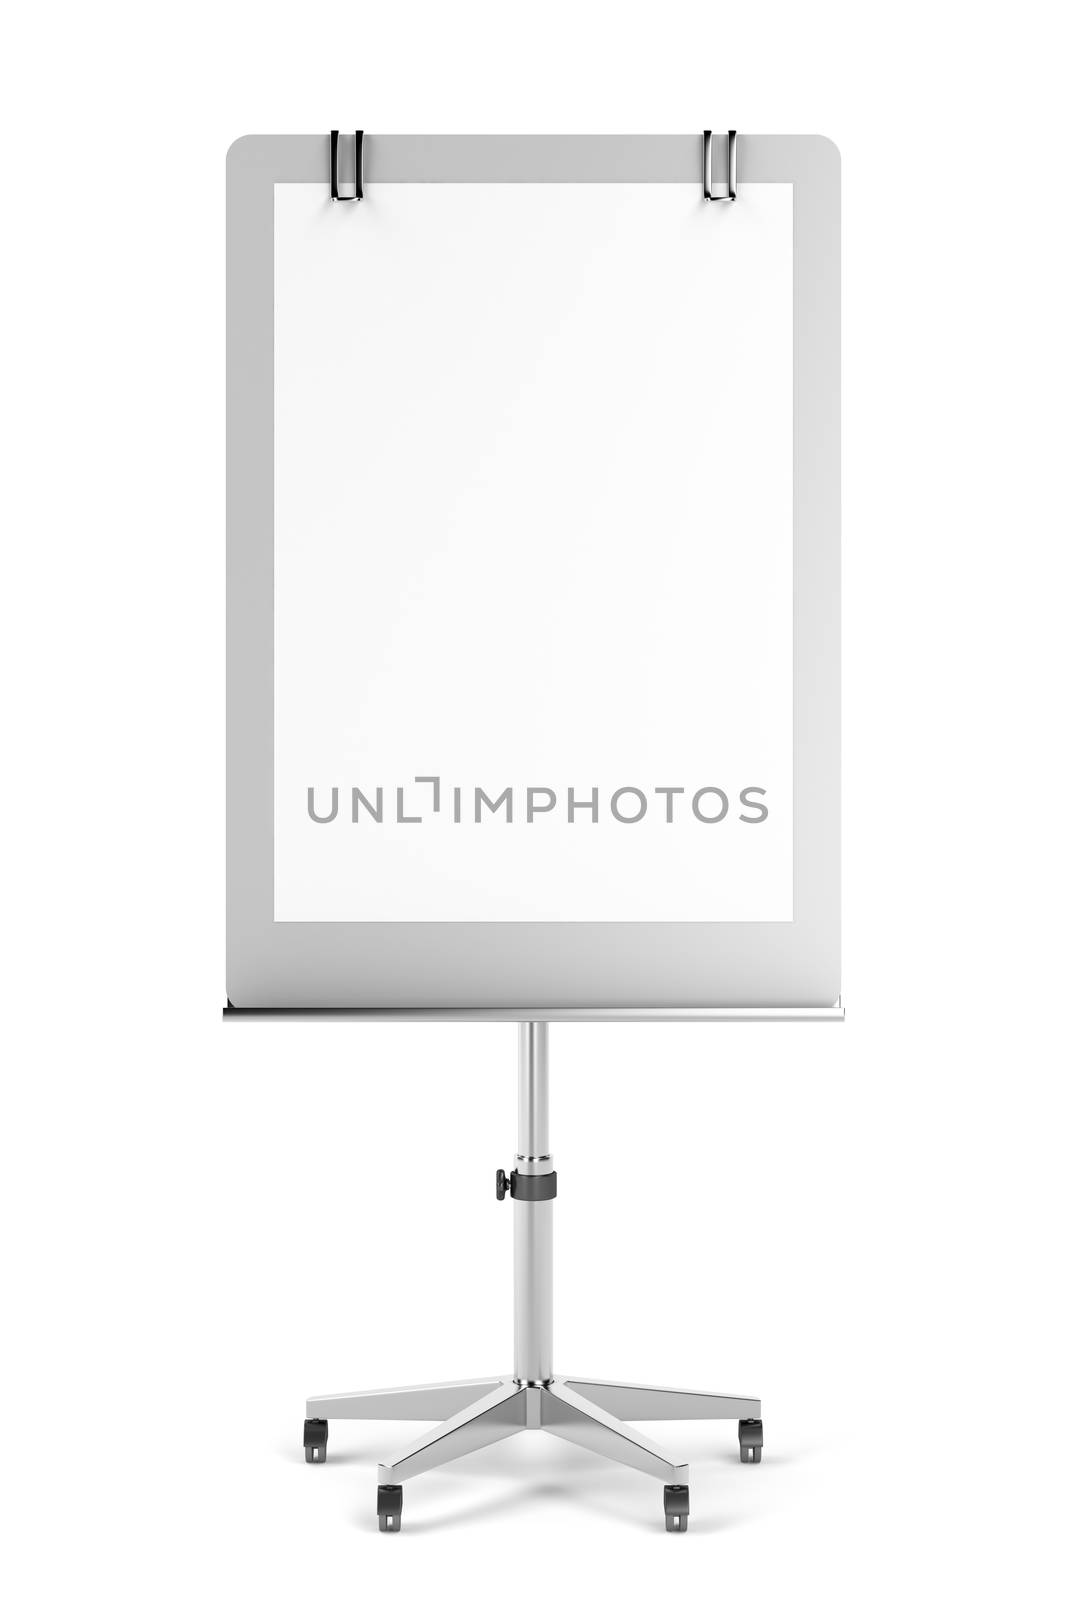 Front view of blank flip chart on white background